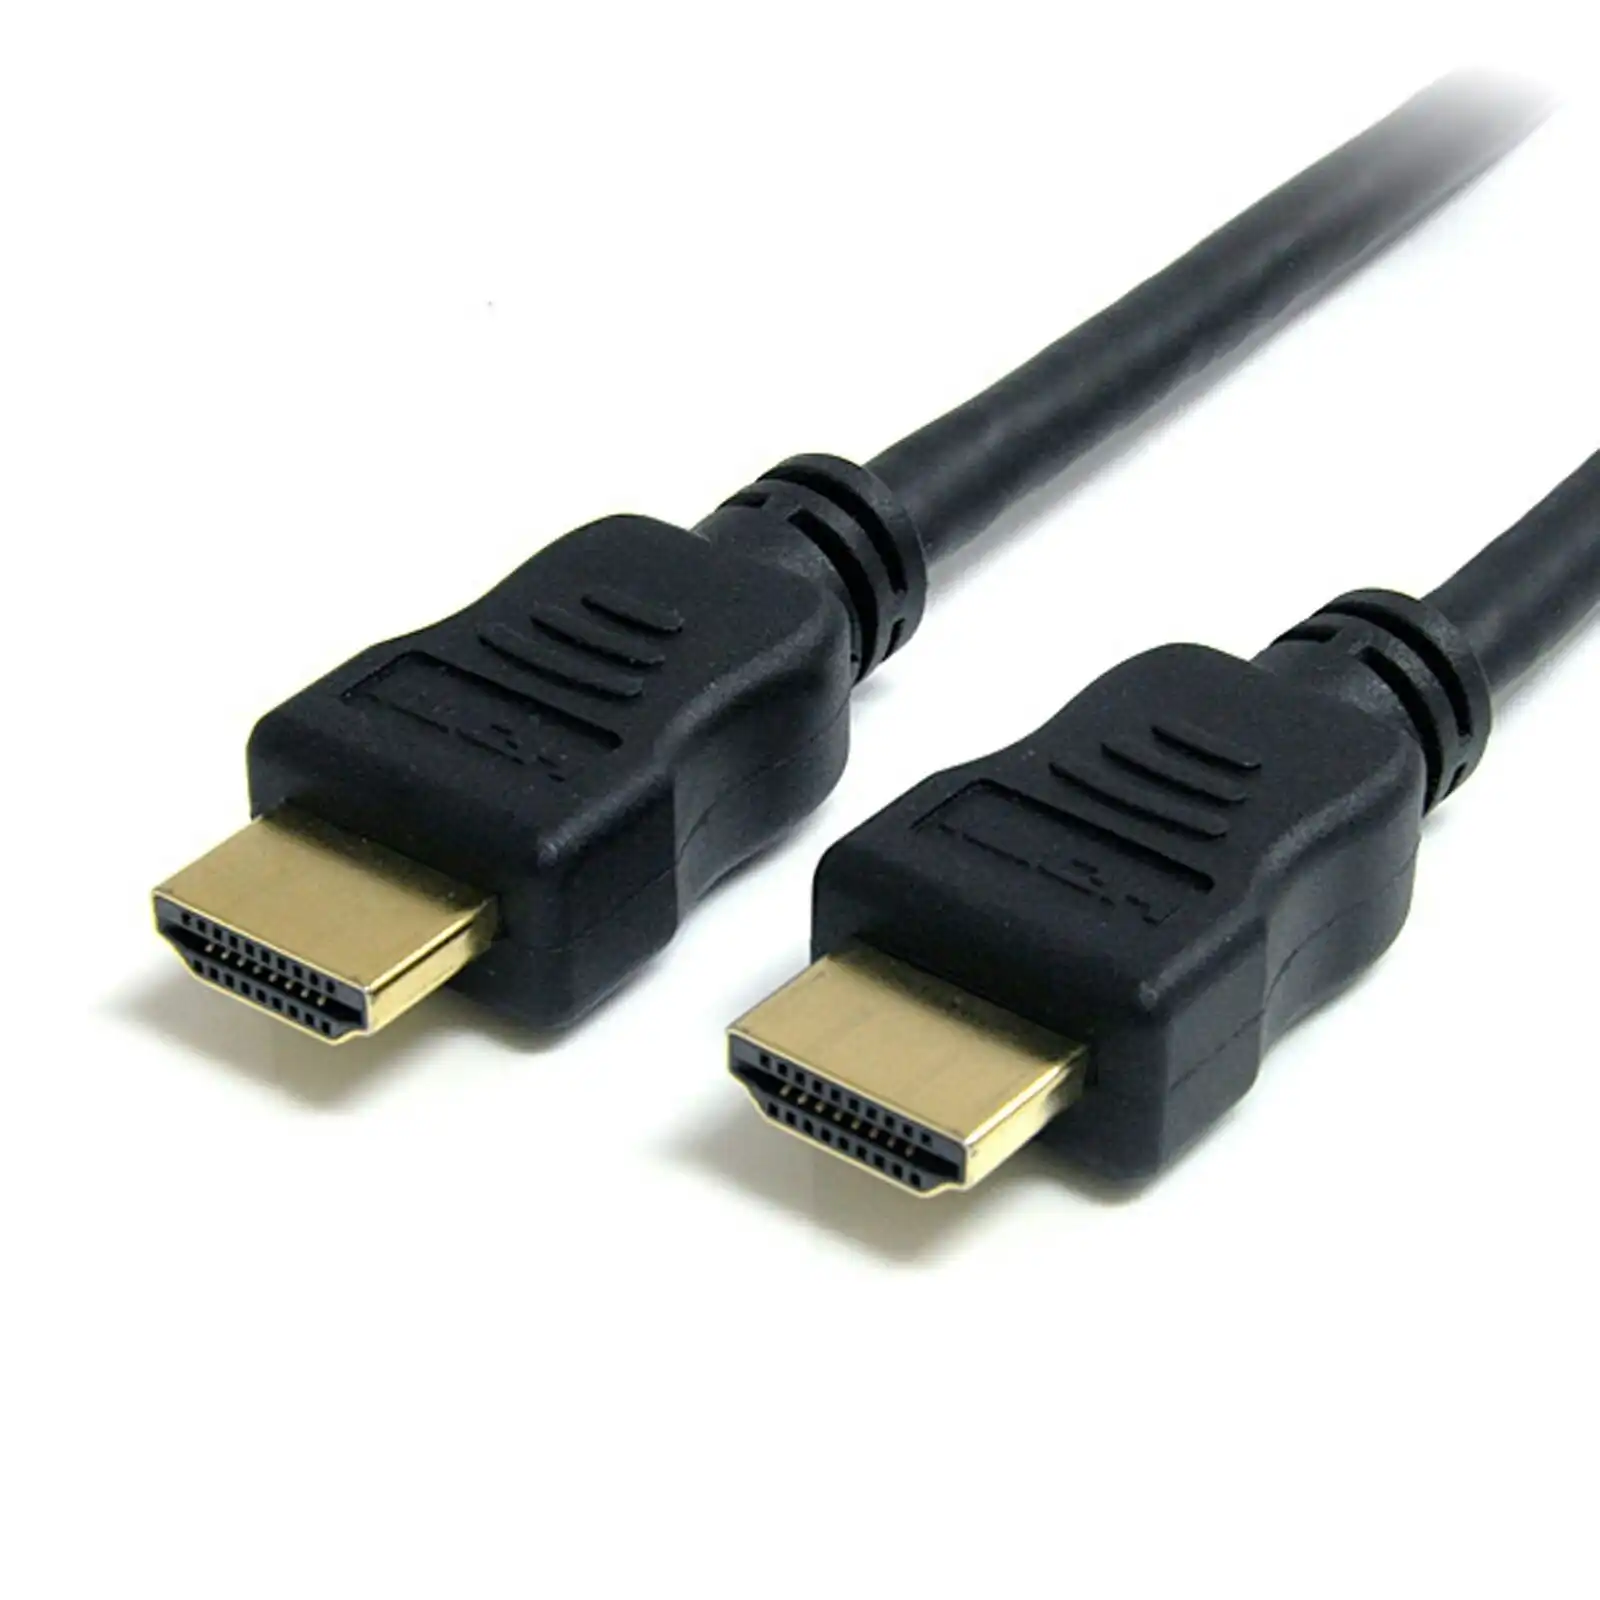 Star Tech 3M 4K/2K UHD Gold Plated Male/Male HDMI Cable w/ Ethernet for HDTV/DVD